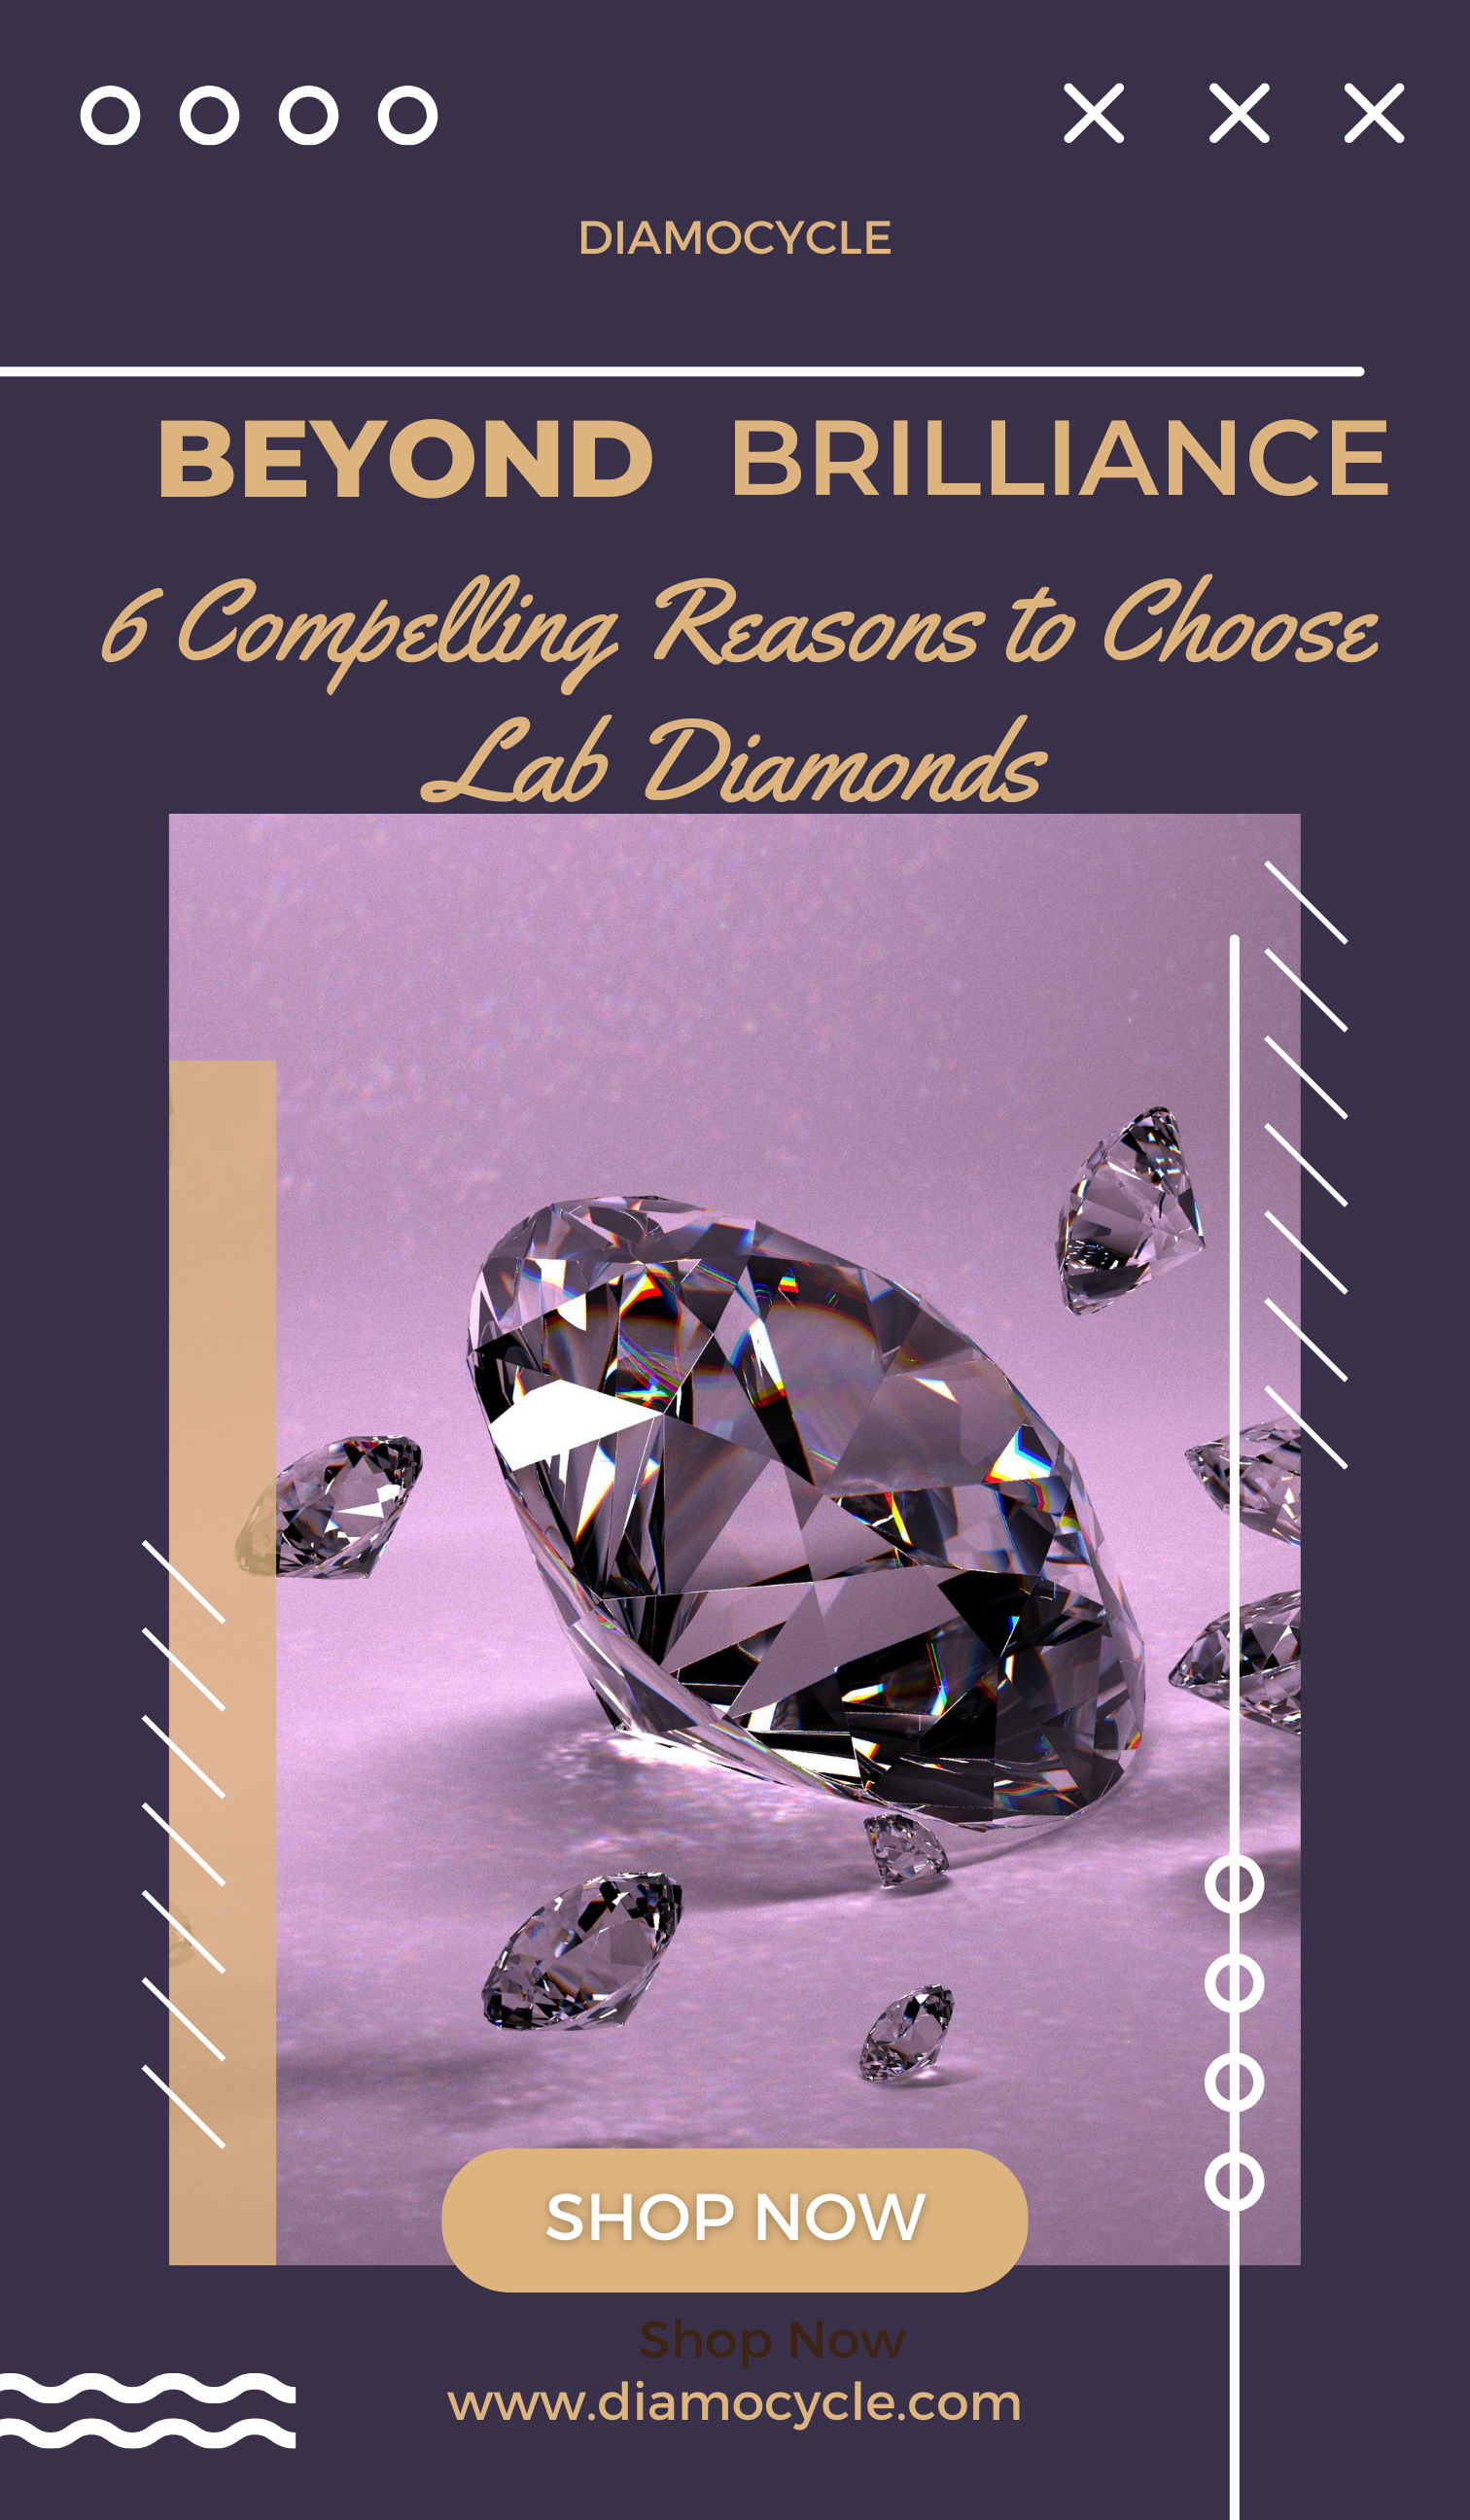 Beyond Brilliance: 6 Compelling Reasons to Choose Lab Diamonds